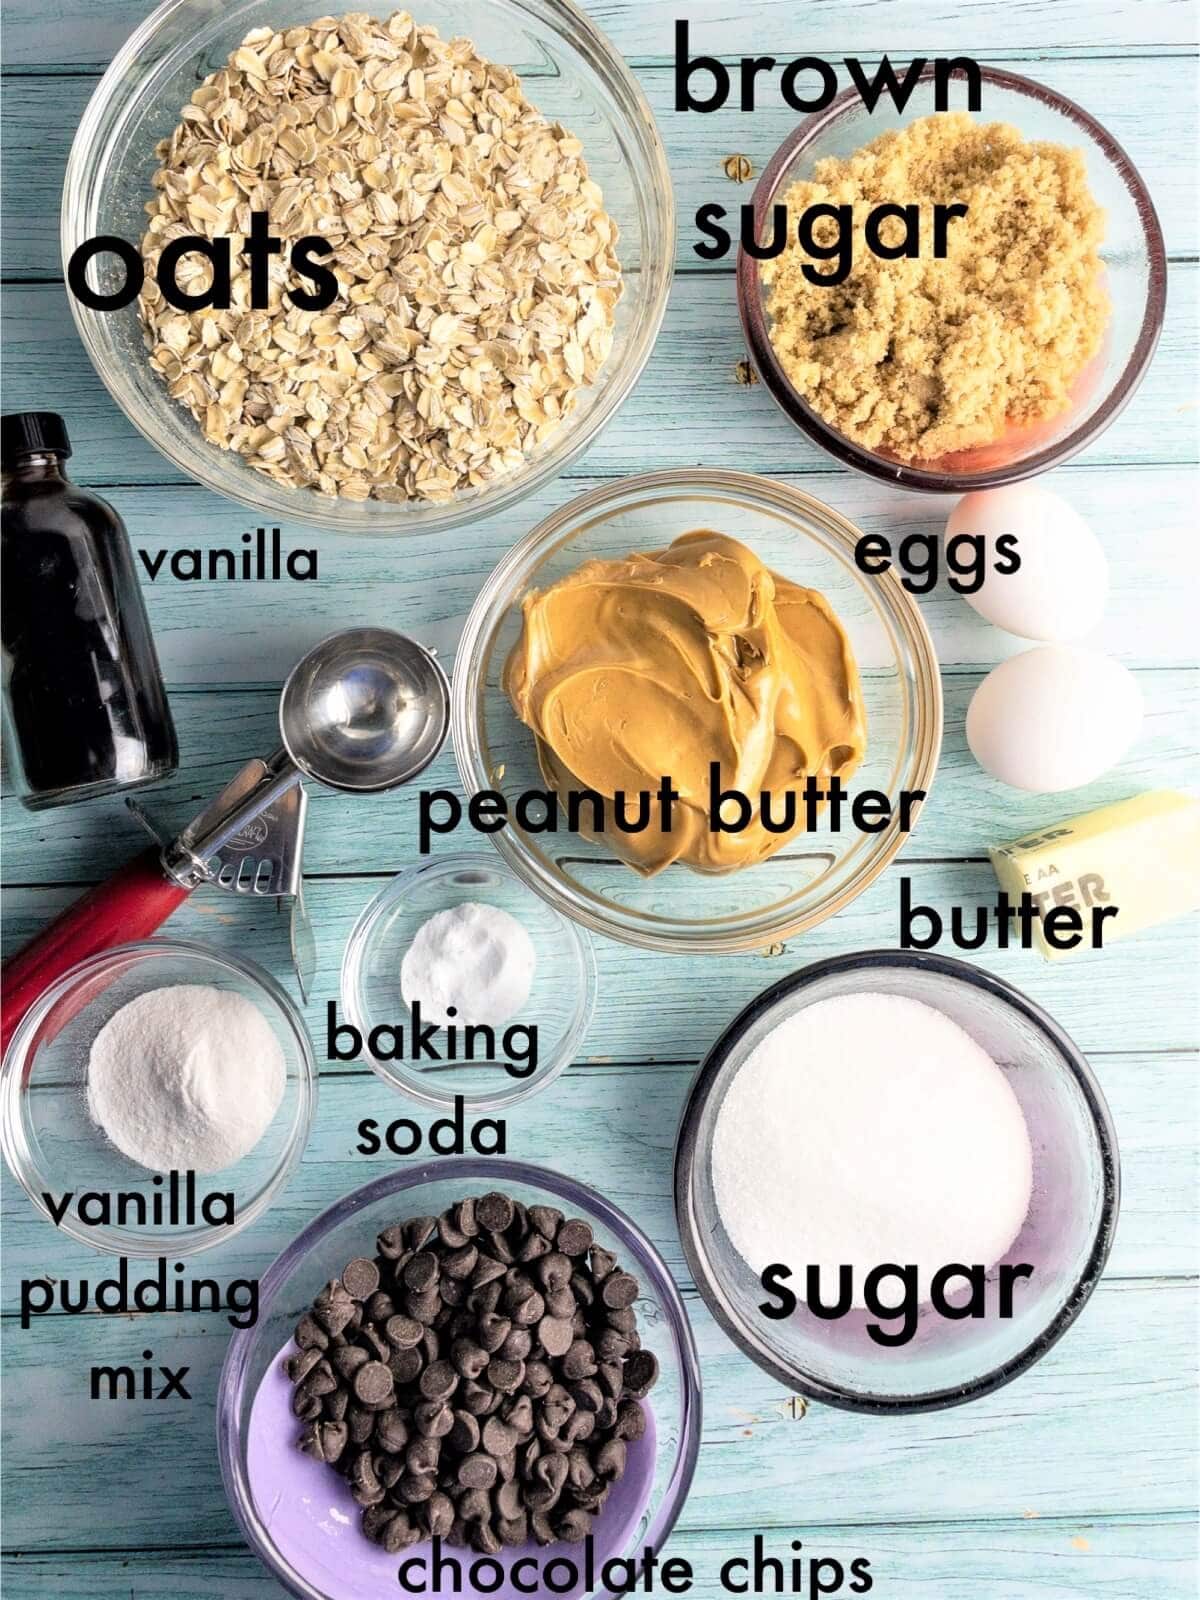 Chewy Monster cookie ingredients with the text "oats, sugar, brown sugar, eggs, butter, peanut butter, baking soda, chocolate chips, vanilla pudding mix, and vanilla.